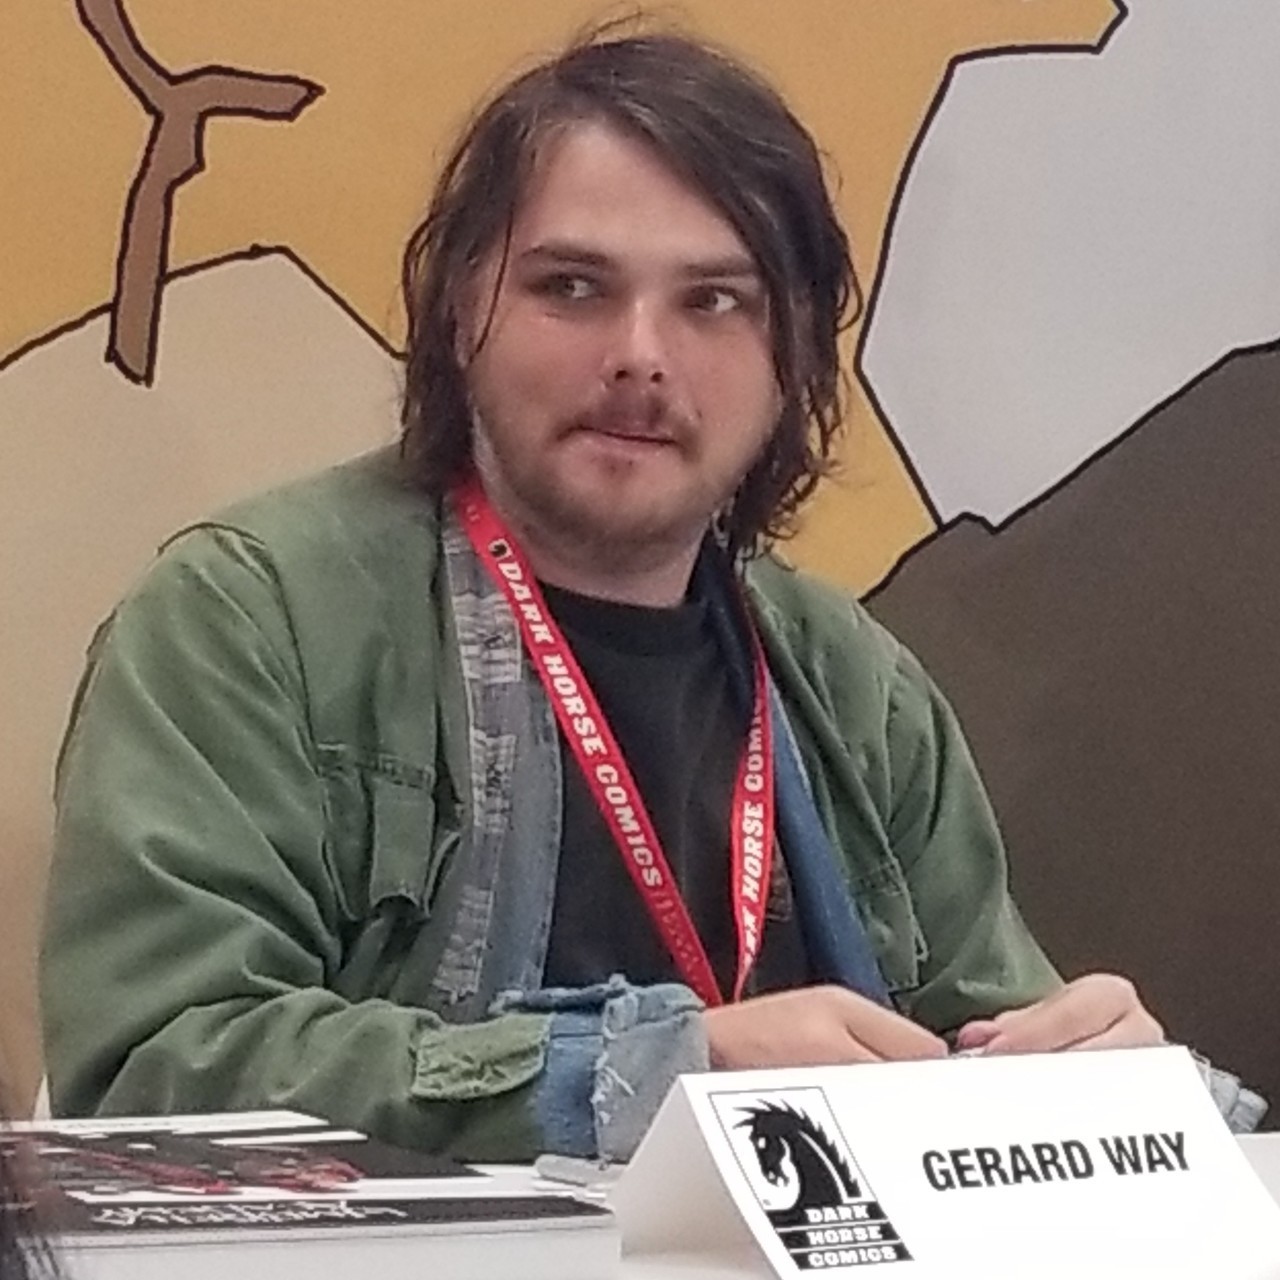 We Ll Carry On Gerard Way At New York Comic Con 2018.